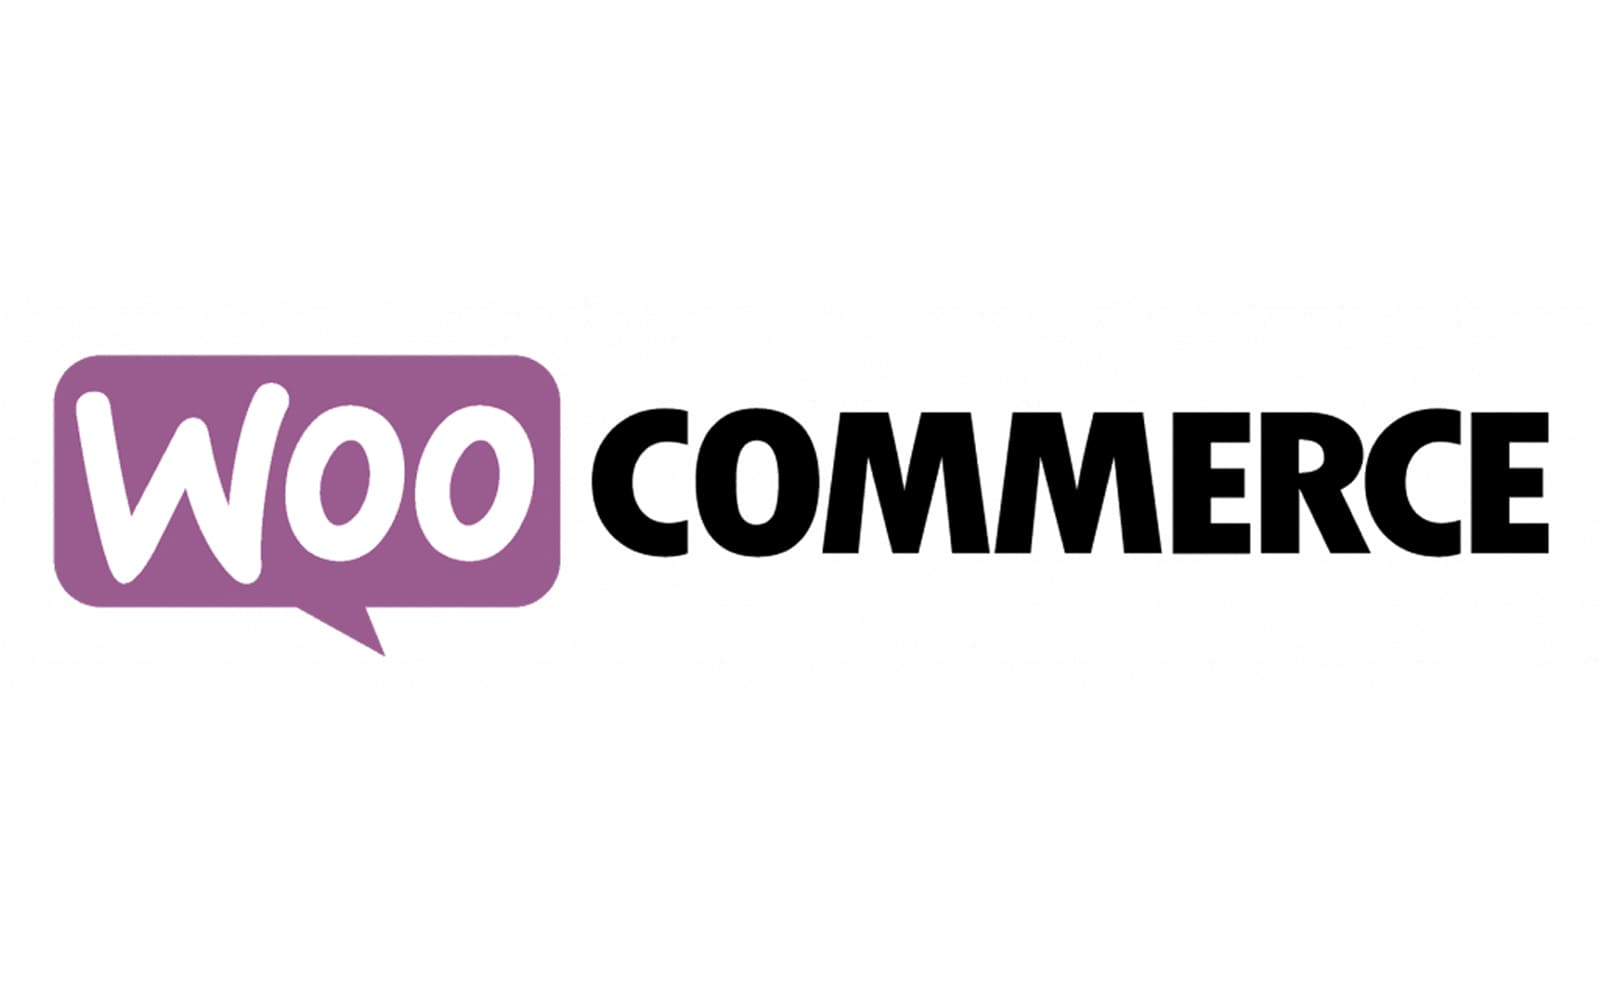 Woocommerce logo showing our work with this system and our sustainable ecommerce clients